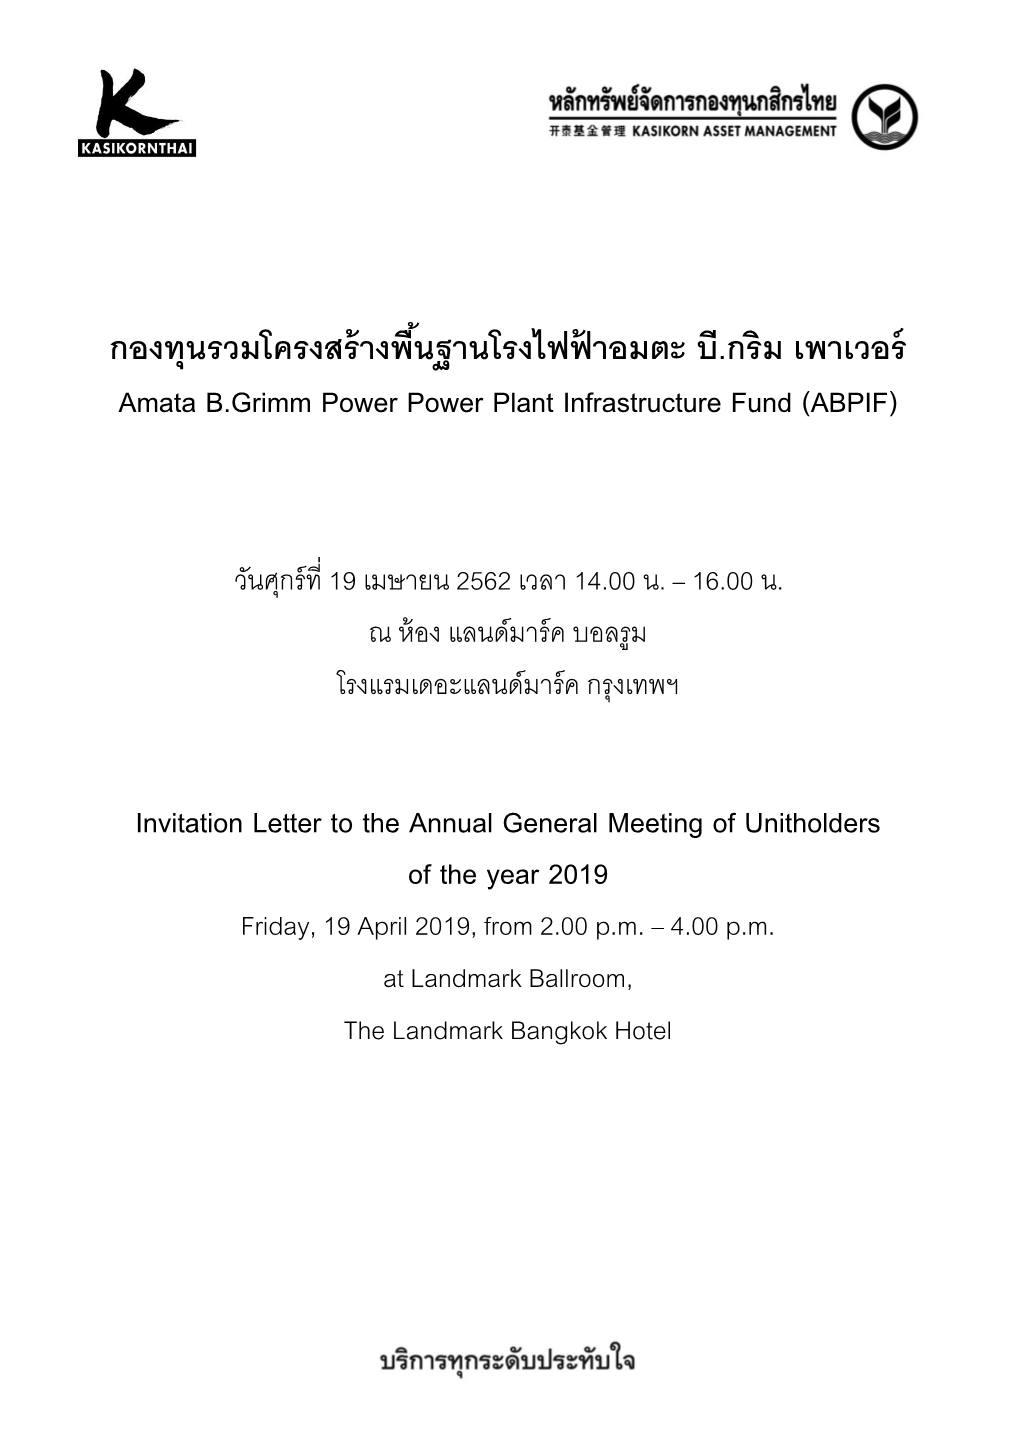 Amata B.Grimm Power Power Plant Infrastructure Fund (ABPIF)